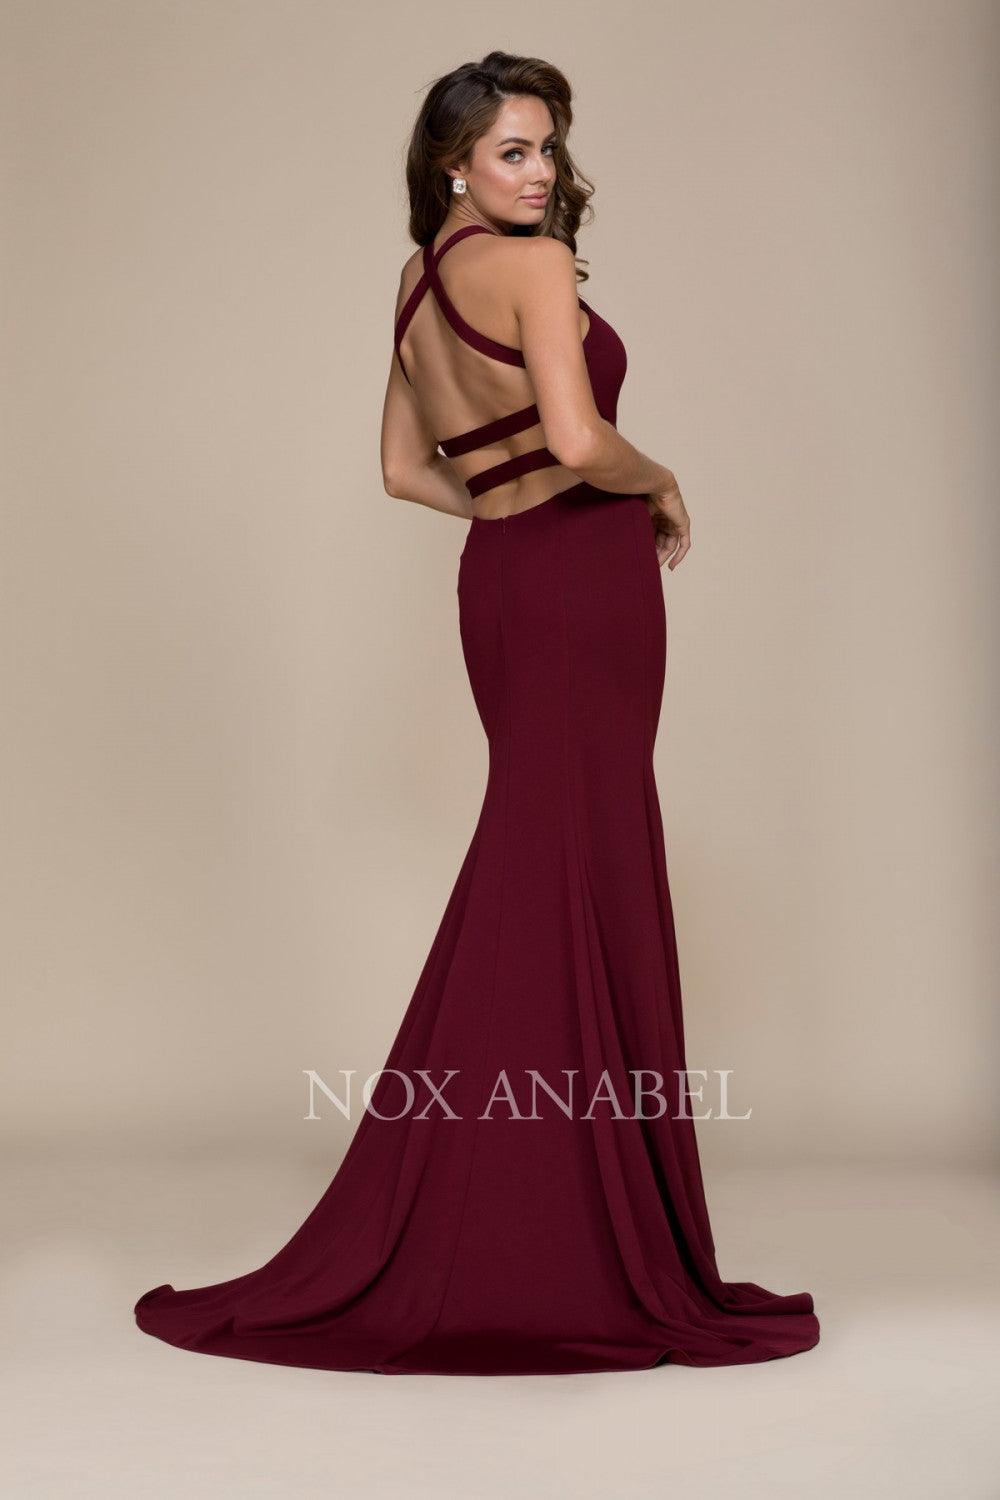 Long Sexy Prom Dress Formal Evening Gown - The Dress Outlet Nox Anabel